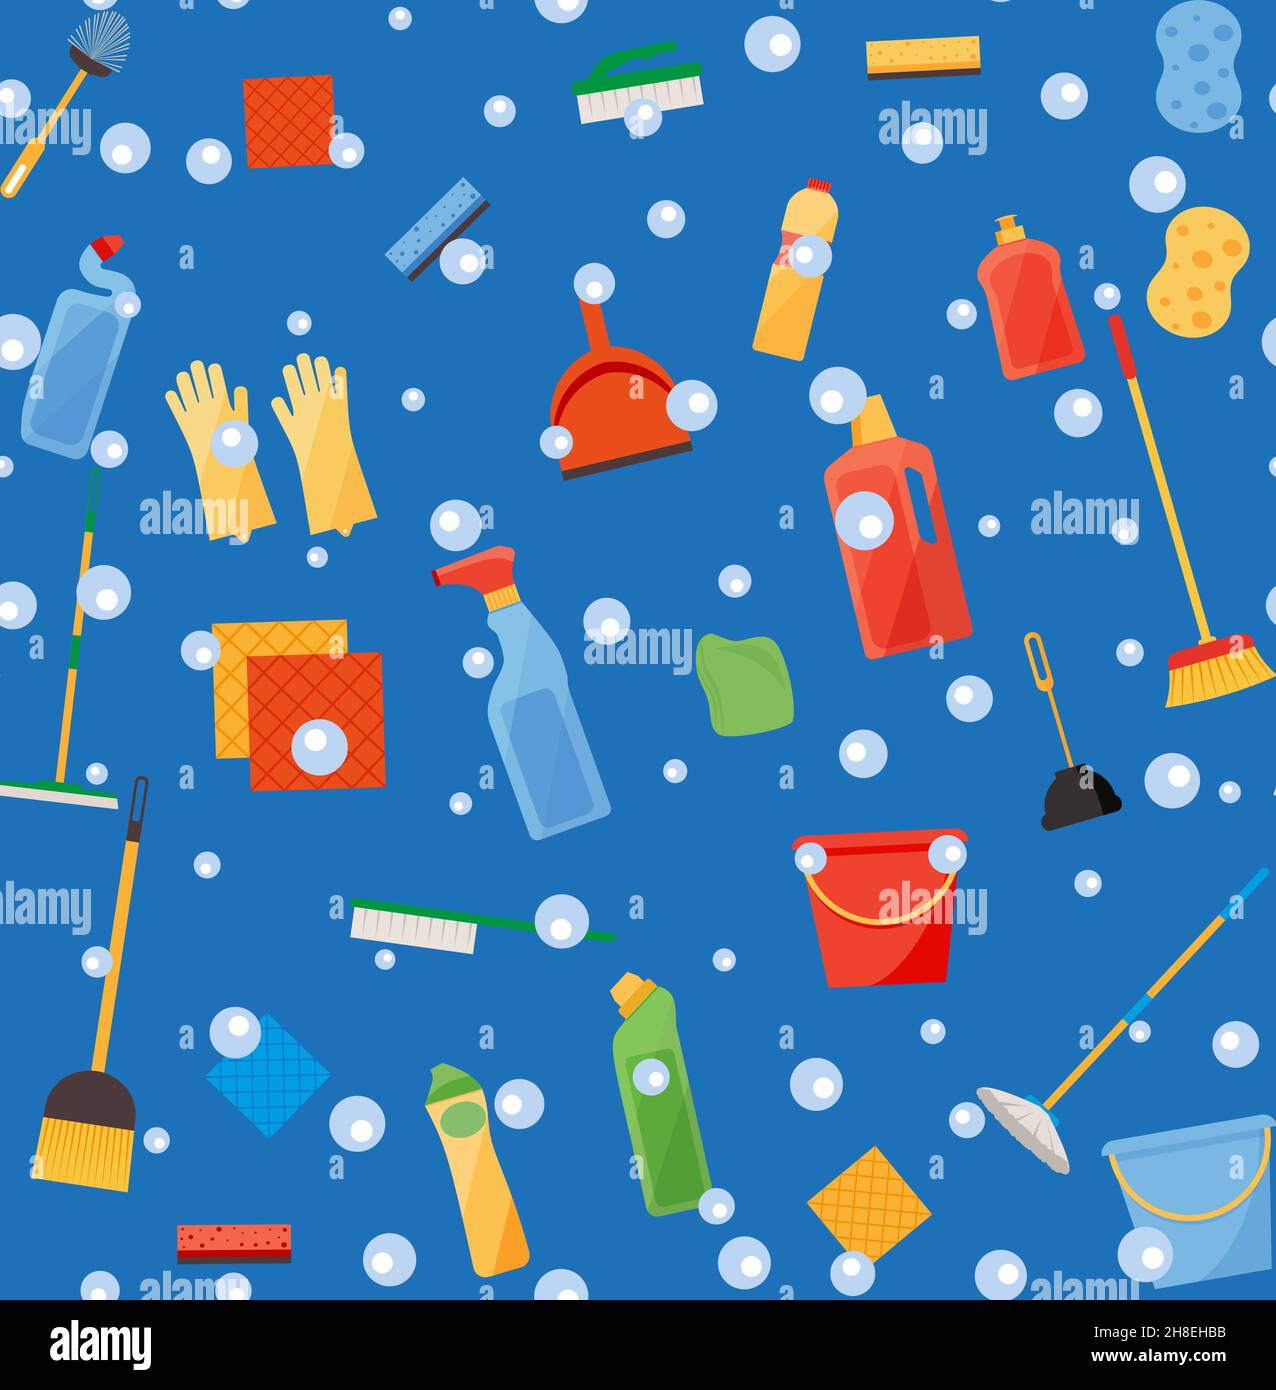 Assorted cleaning items set with brooms, bucket, mops, spray, brushes, sponges. Seamless pattern Eps 10 Stock Vector